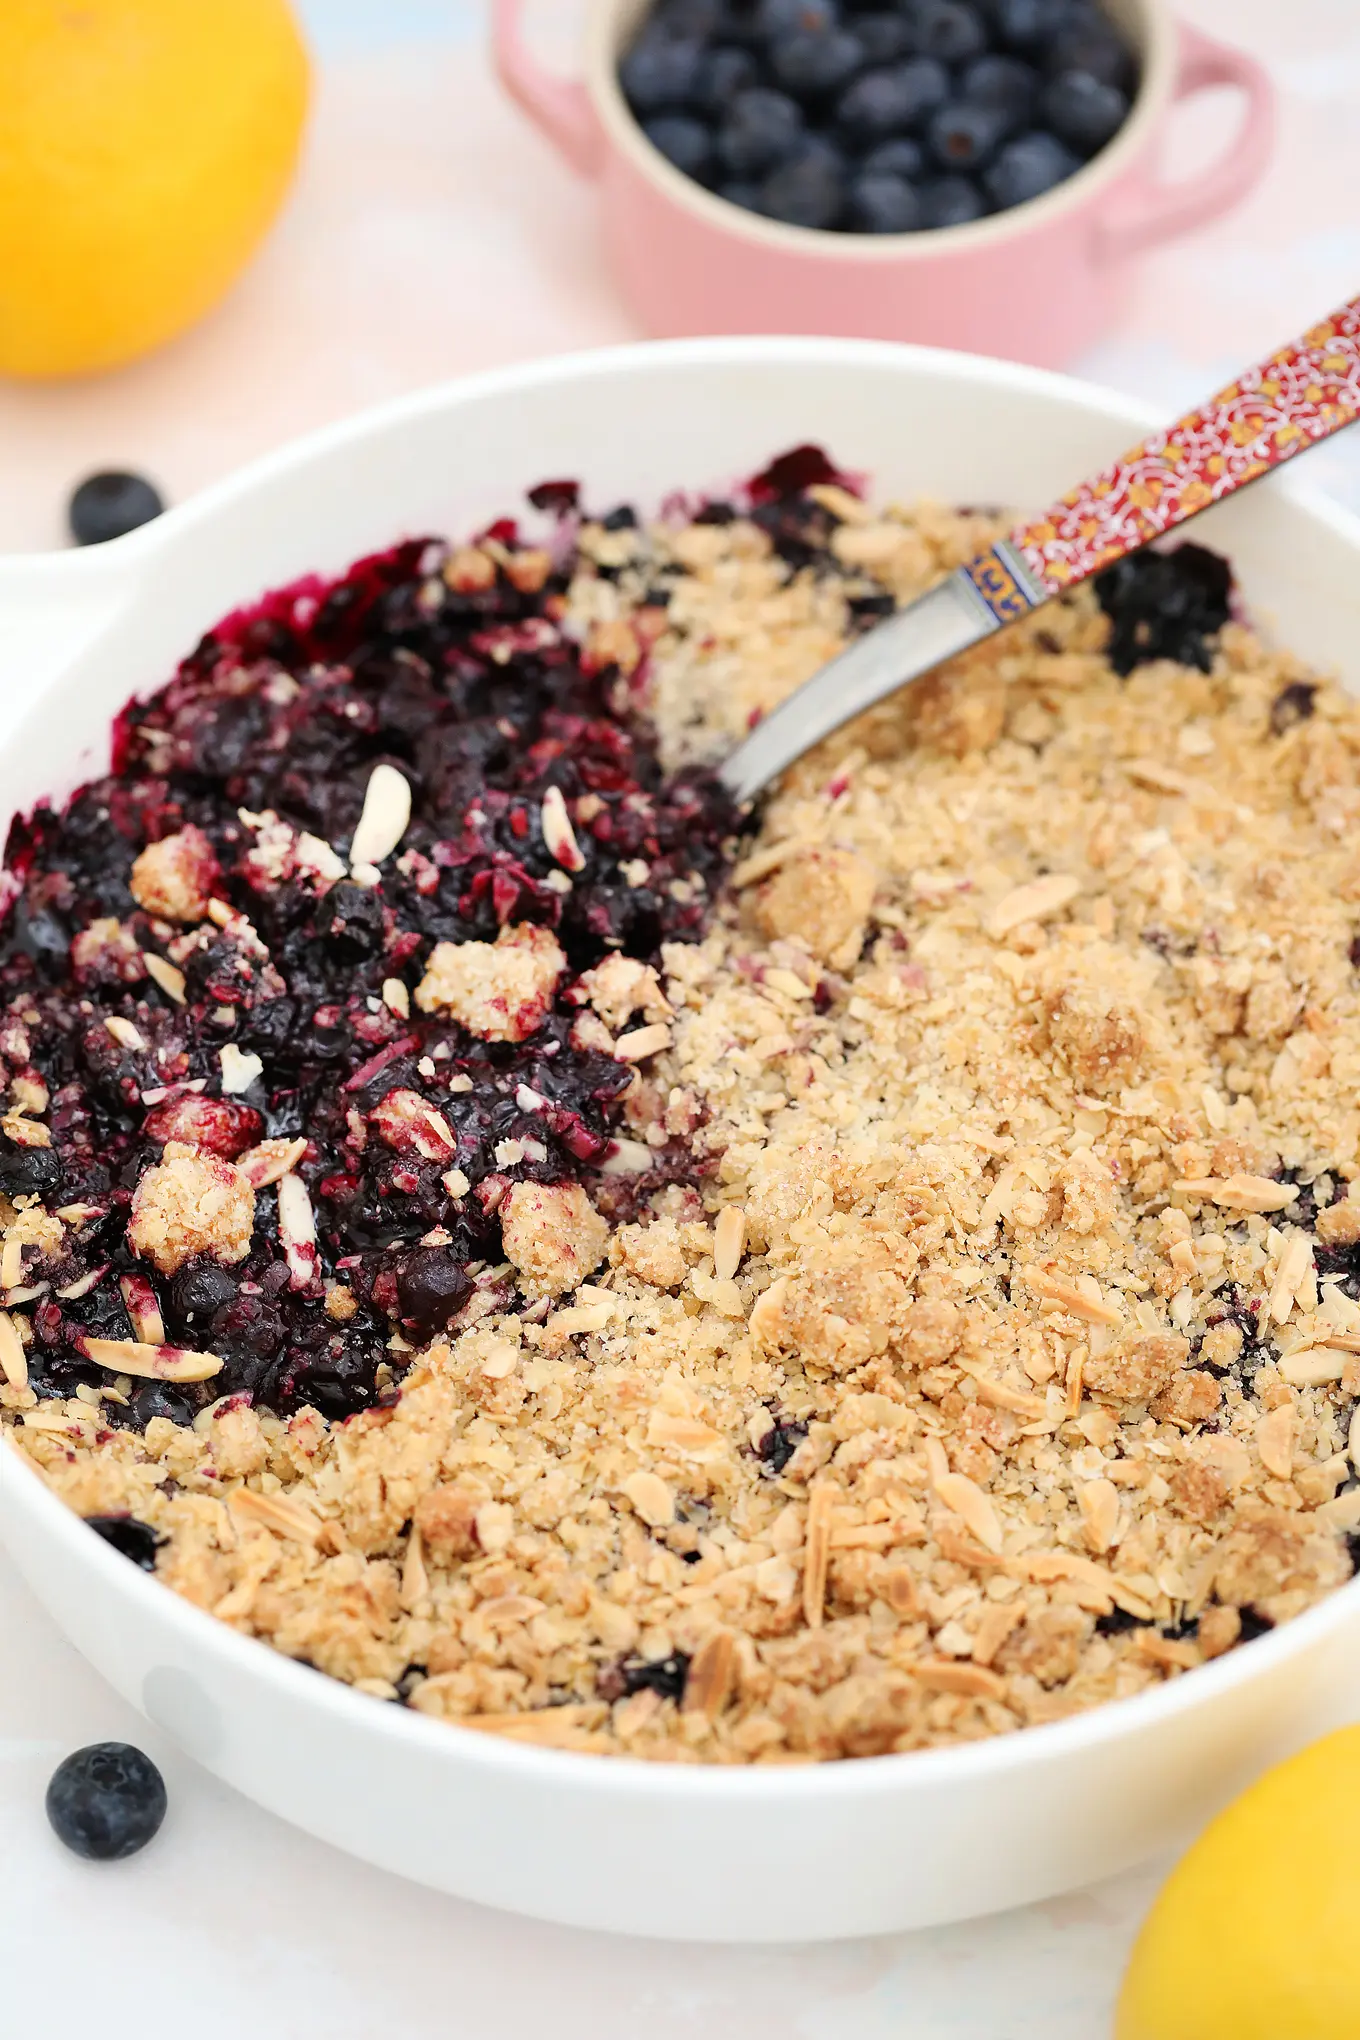 Blueberry Crisp Recipe [Video] - Sweet and Savory Meals